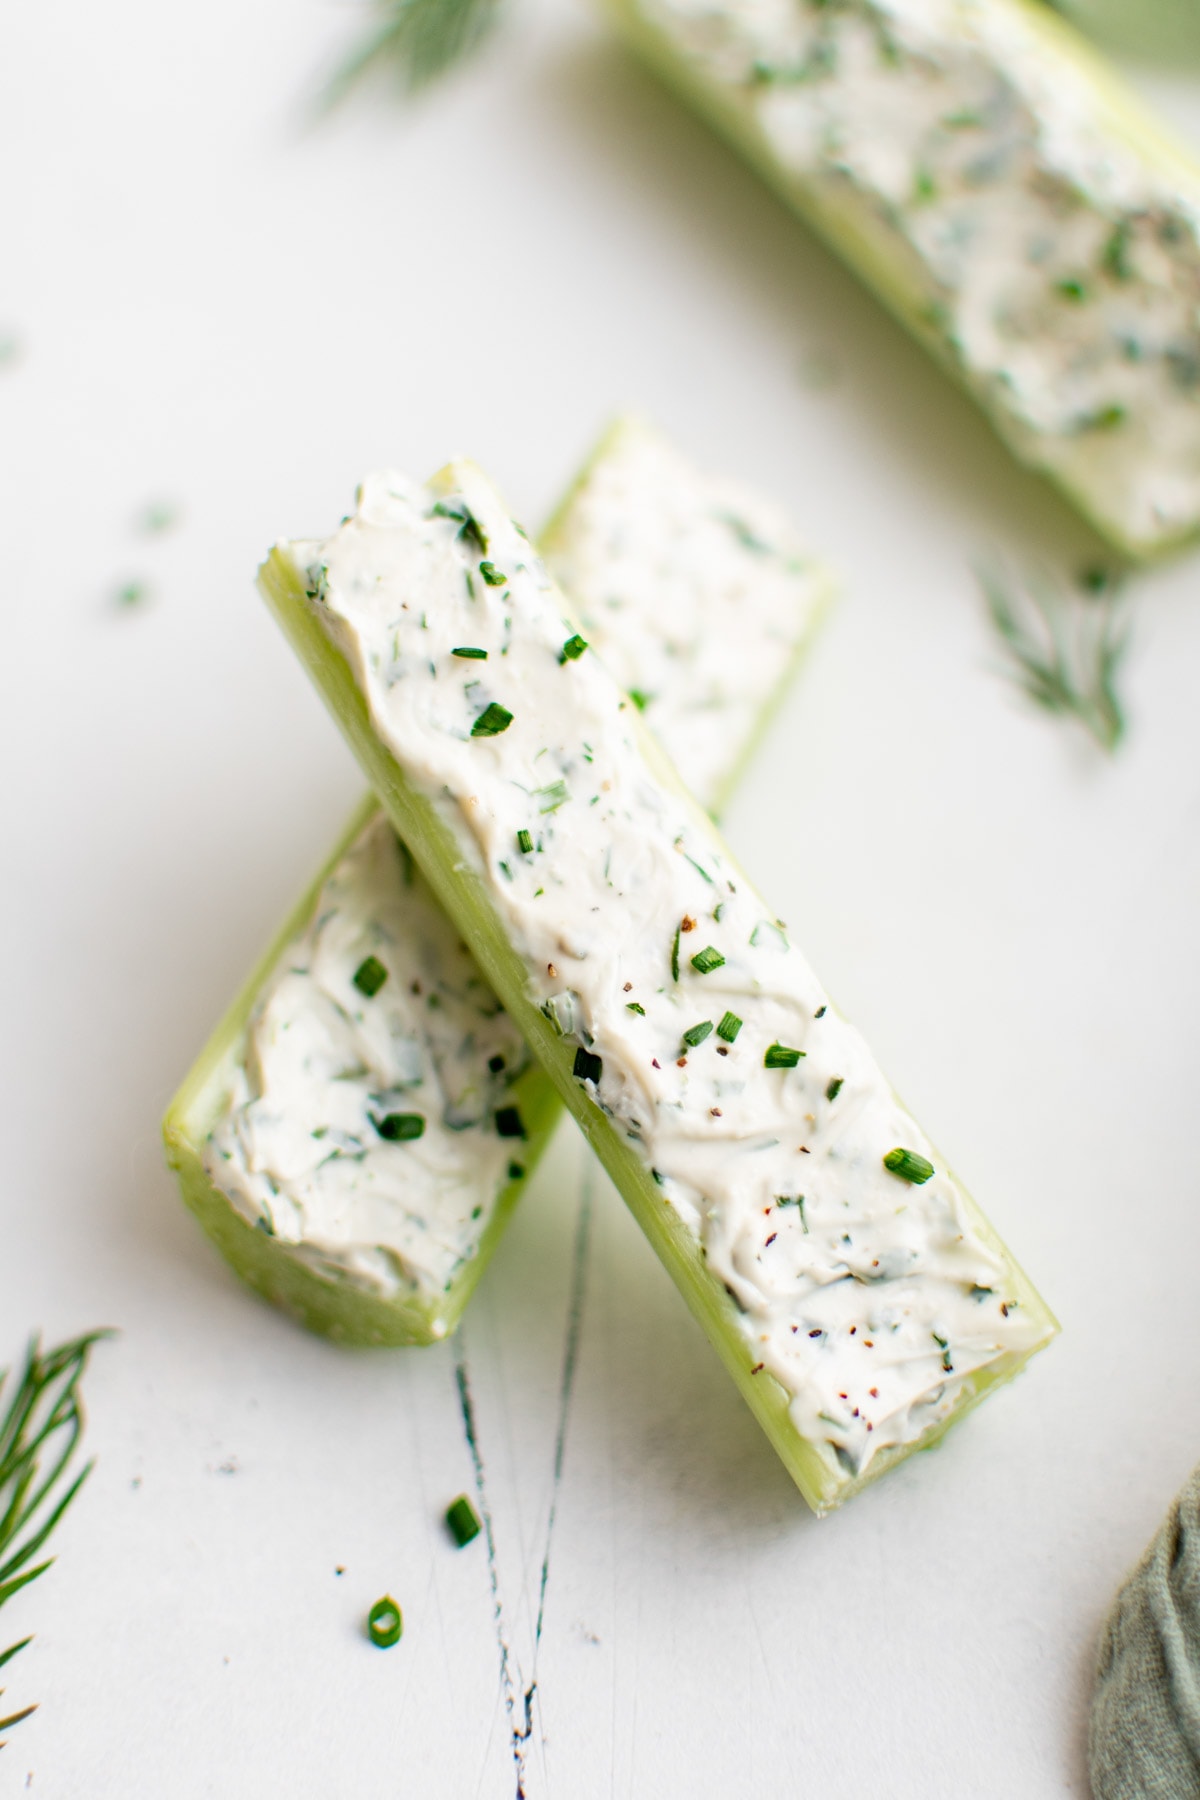 Celery sticks with herb cream cheese. 